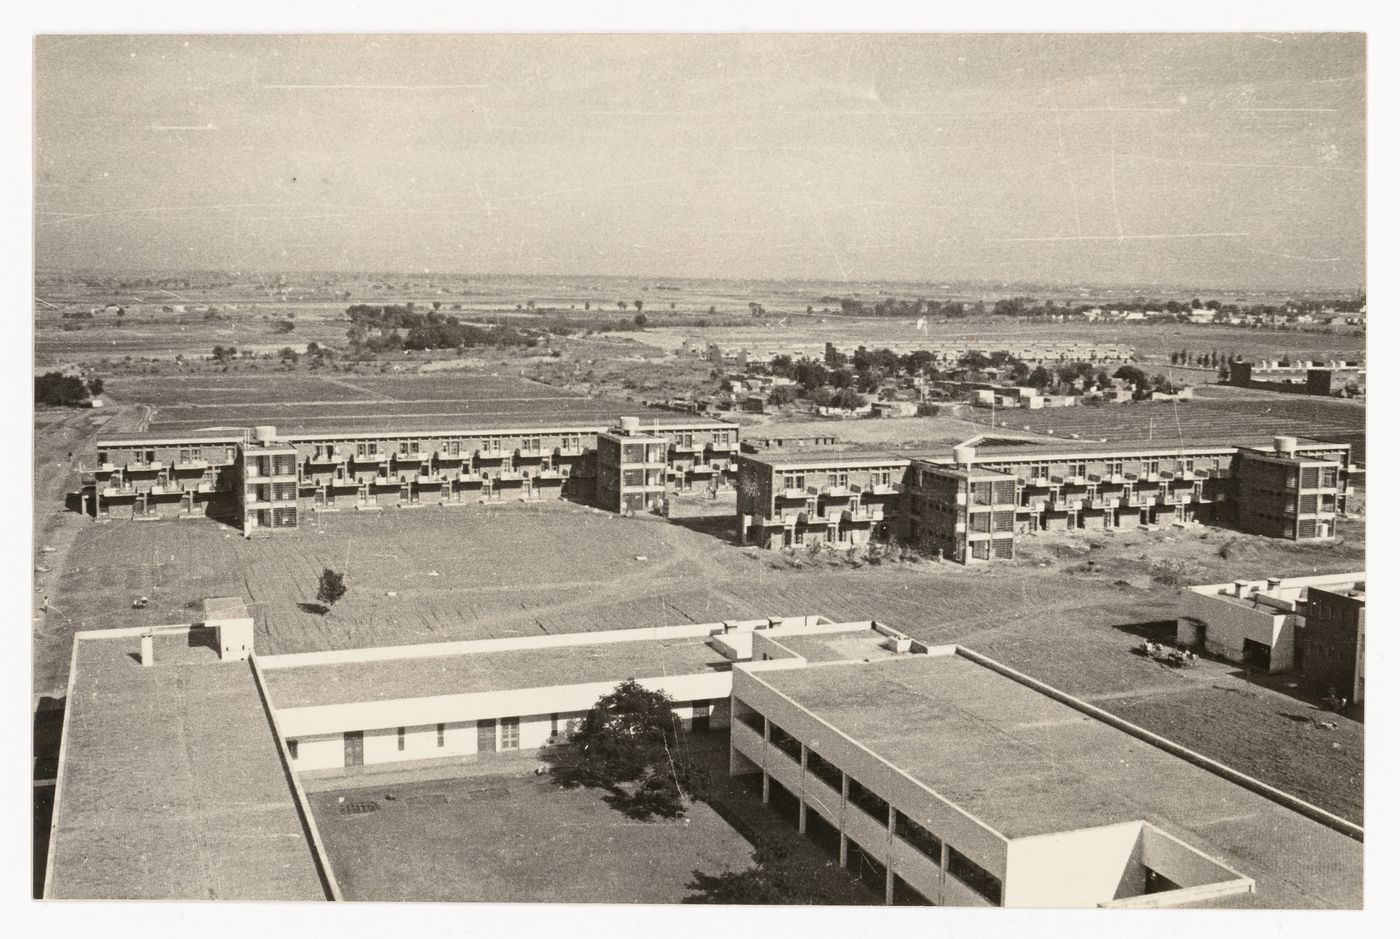 Photograph of Punjab Agricultural University in Ludhiana, India